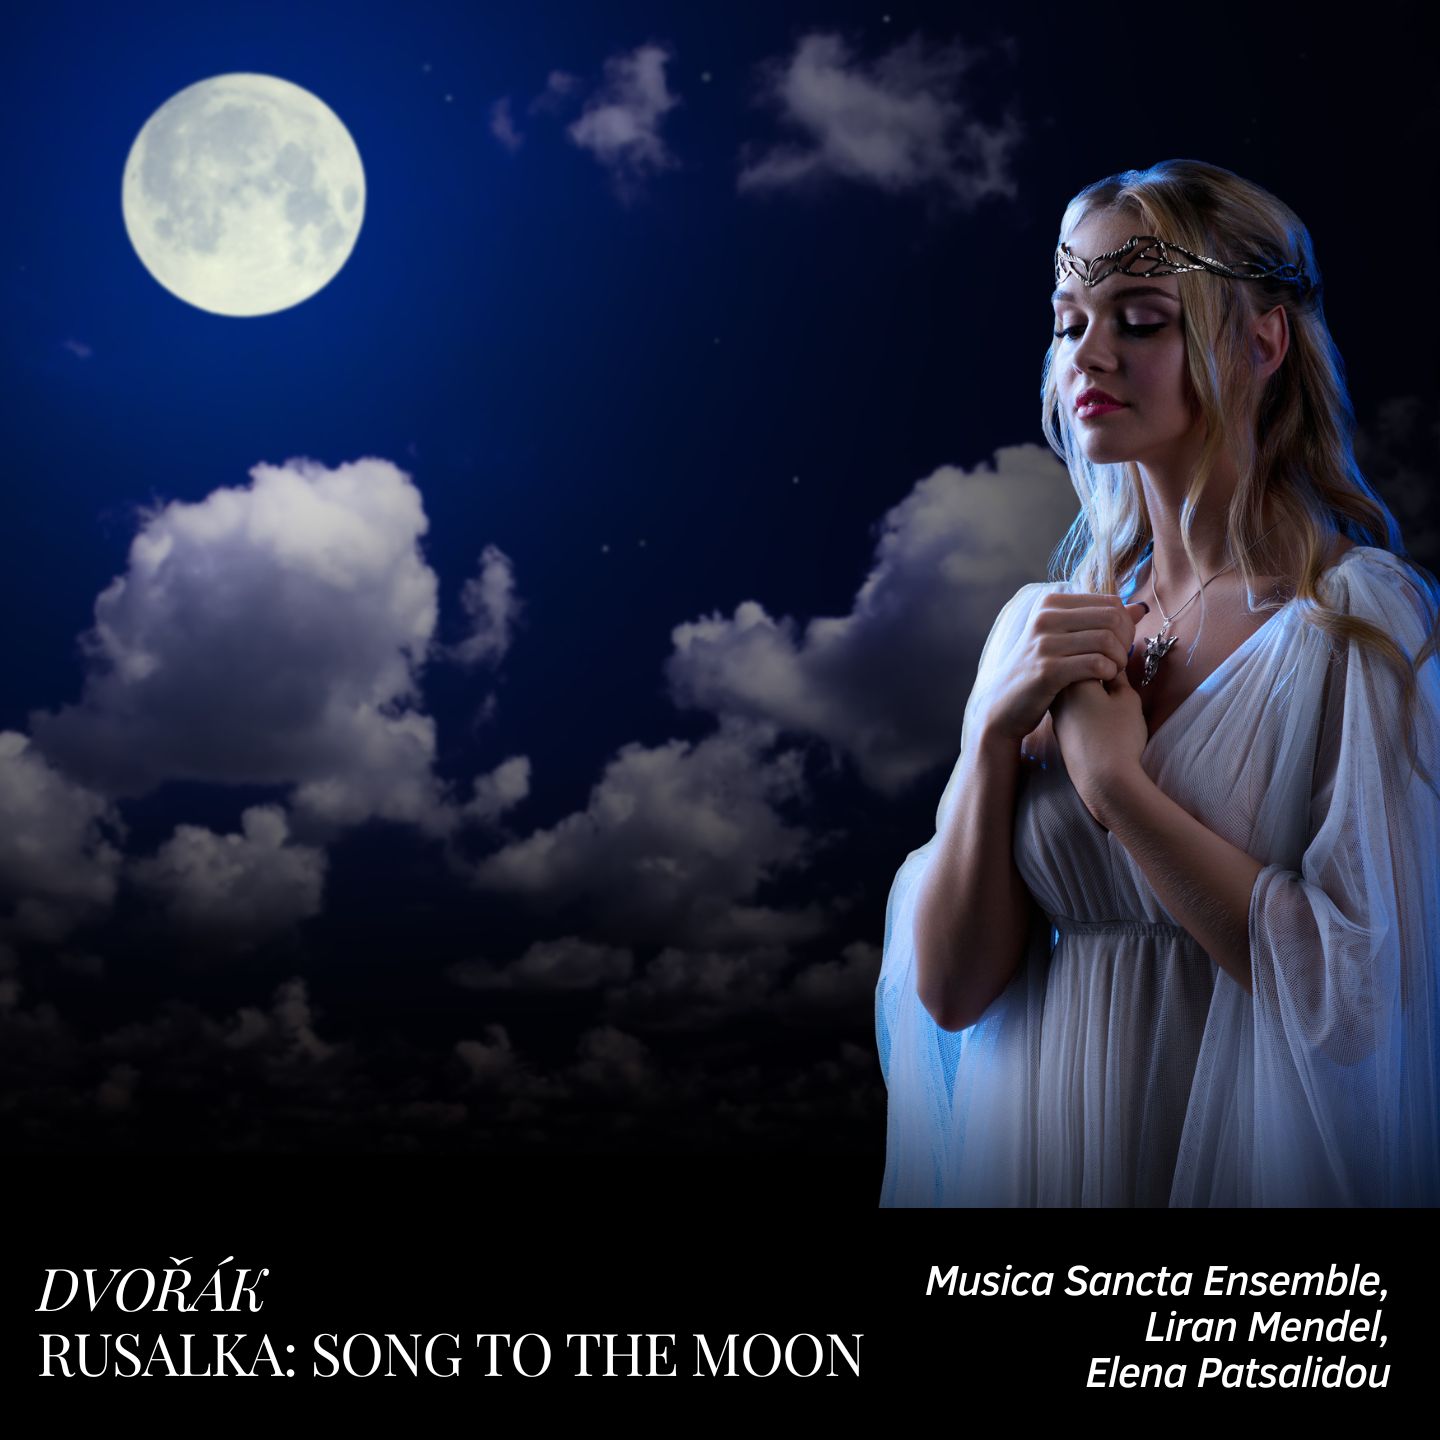 Rusalka, Op. 114: “Song to the Moon”